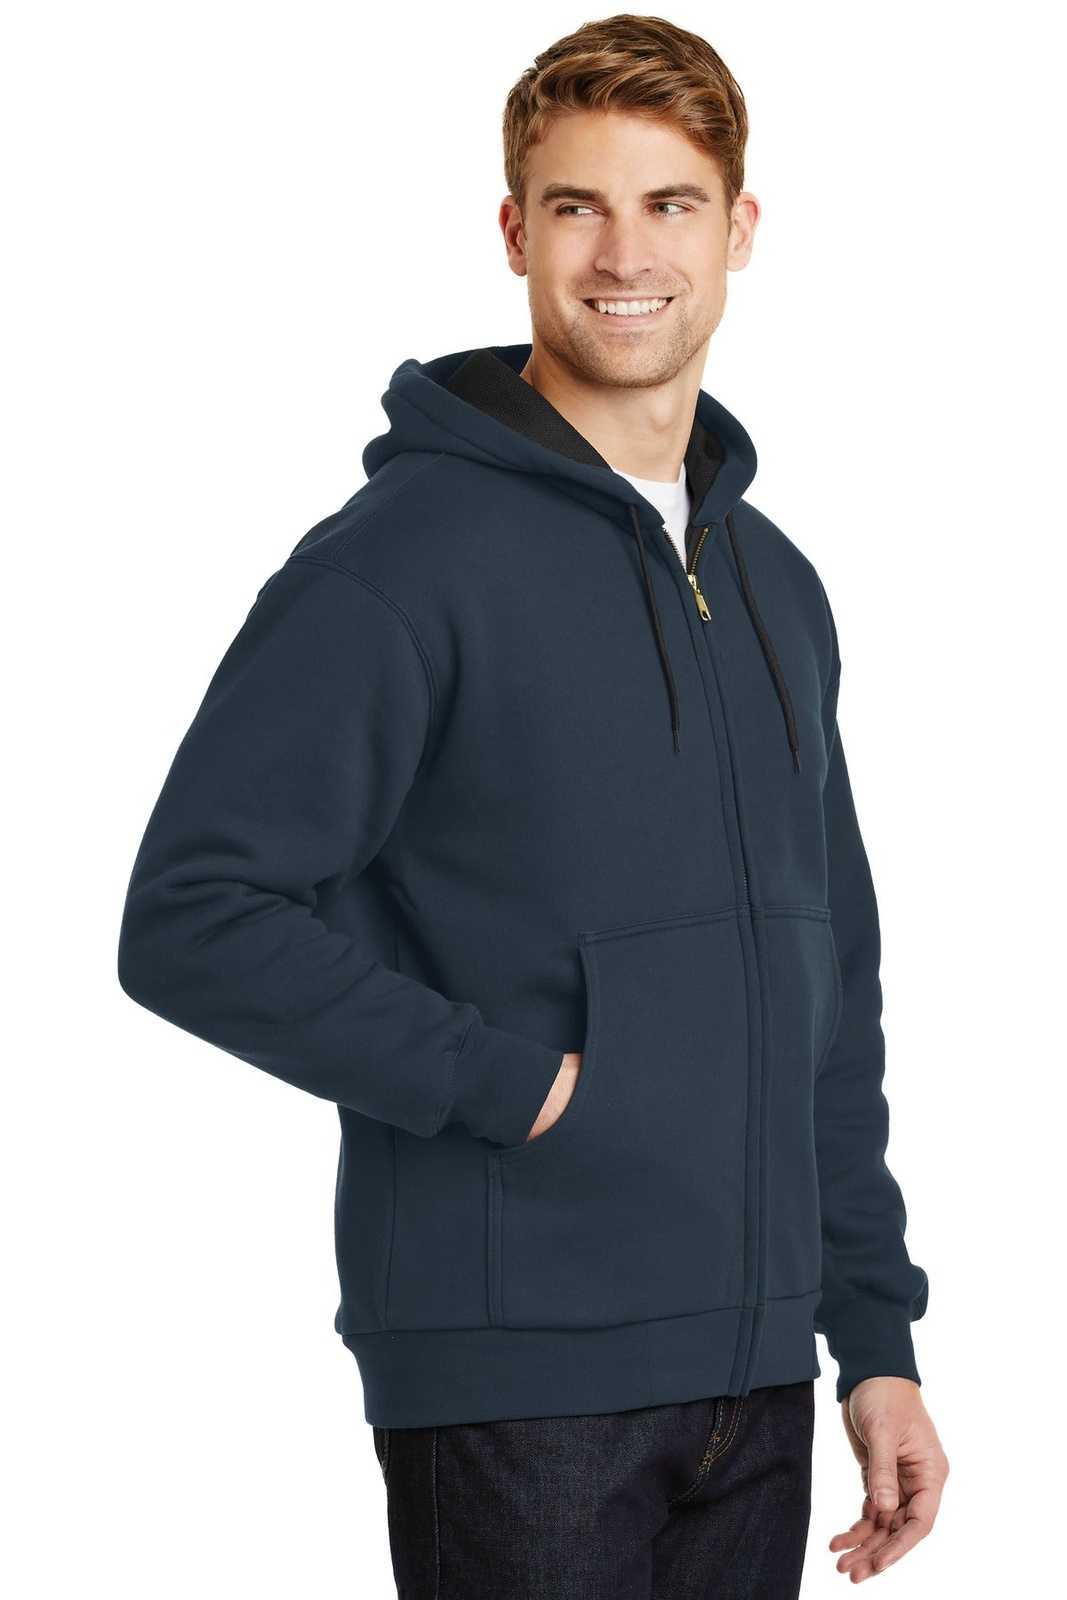 CornerStone CS620 Heavyweight Full-Zip Hooded Sweatshirt with Thermal Lining - Navy - HIT a Double - 4